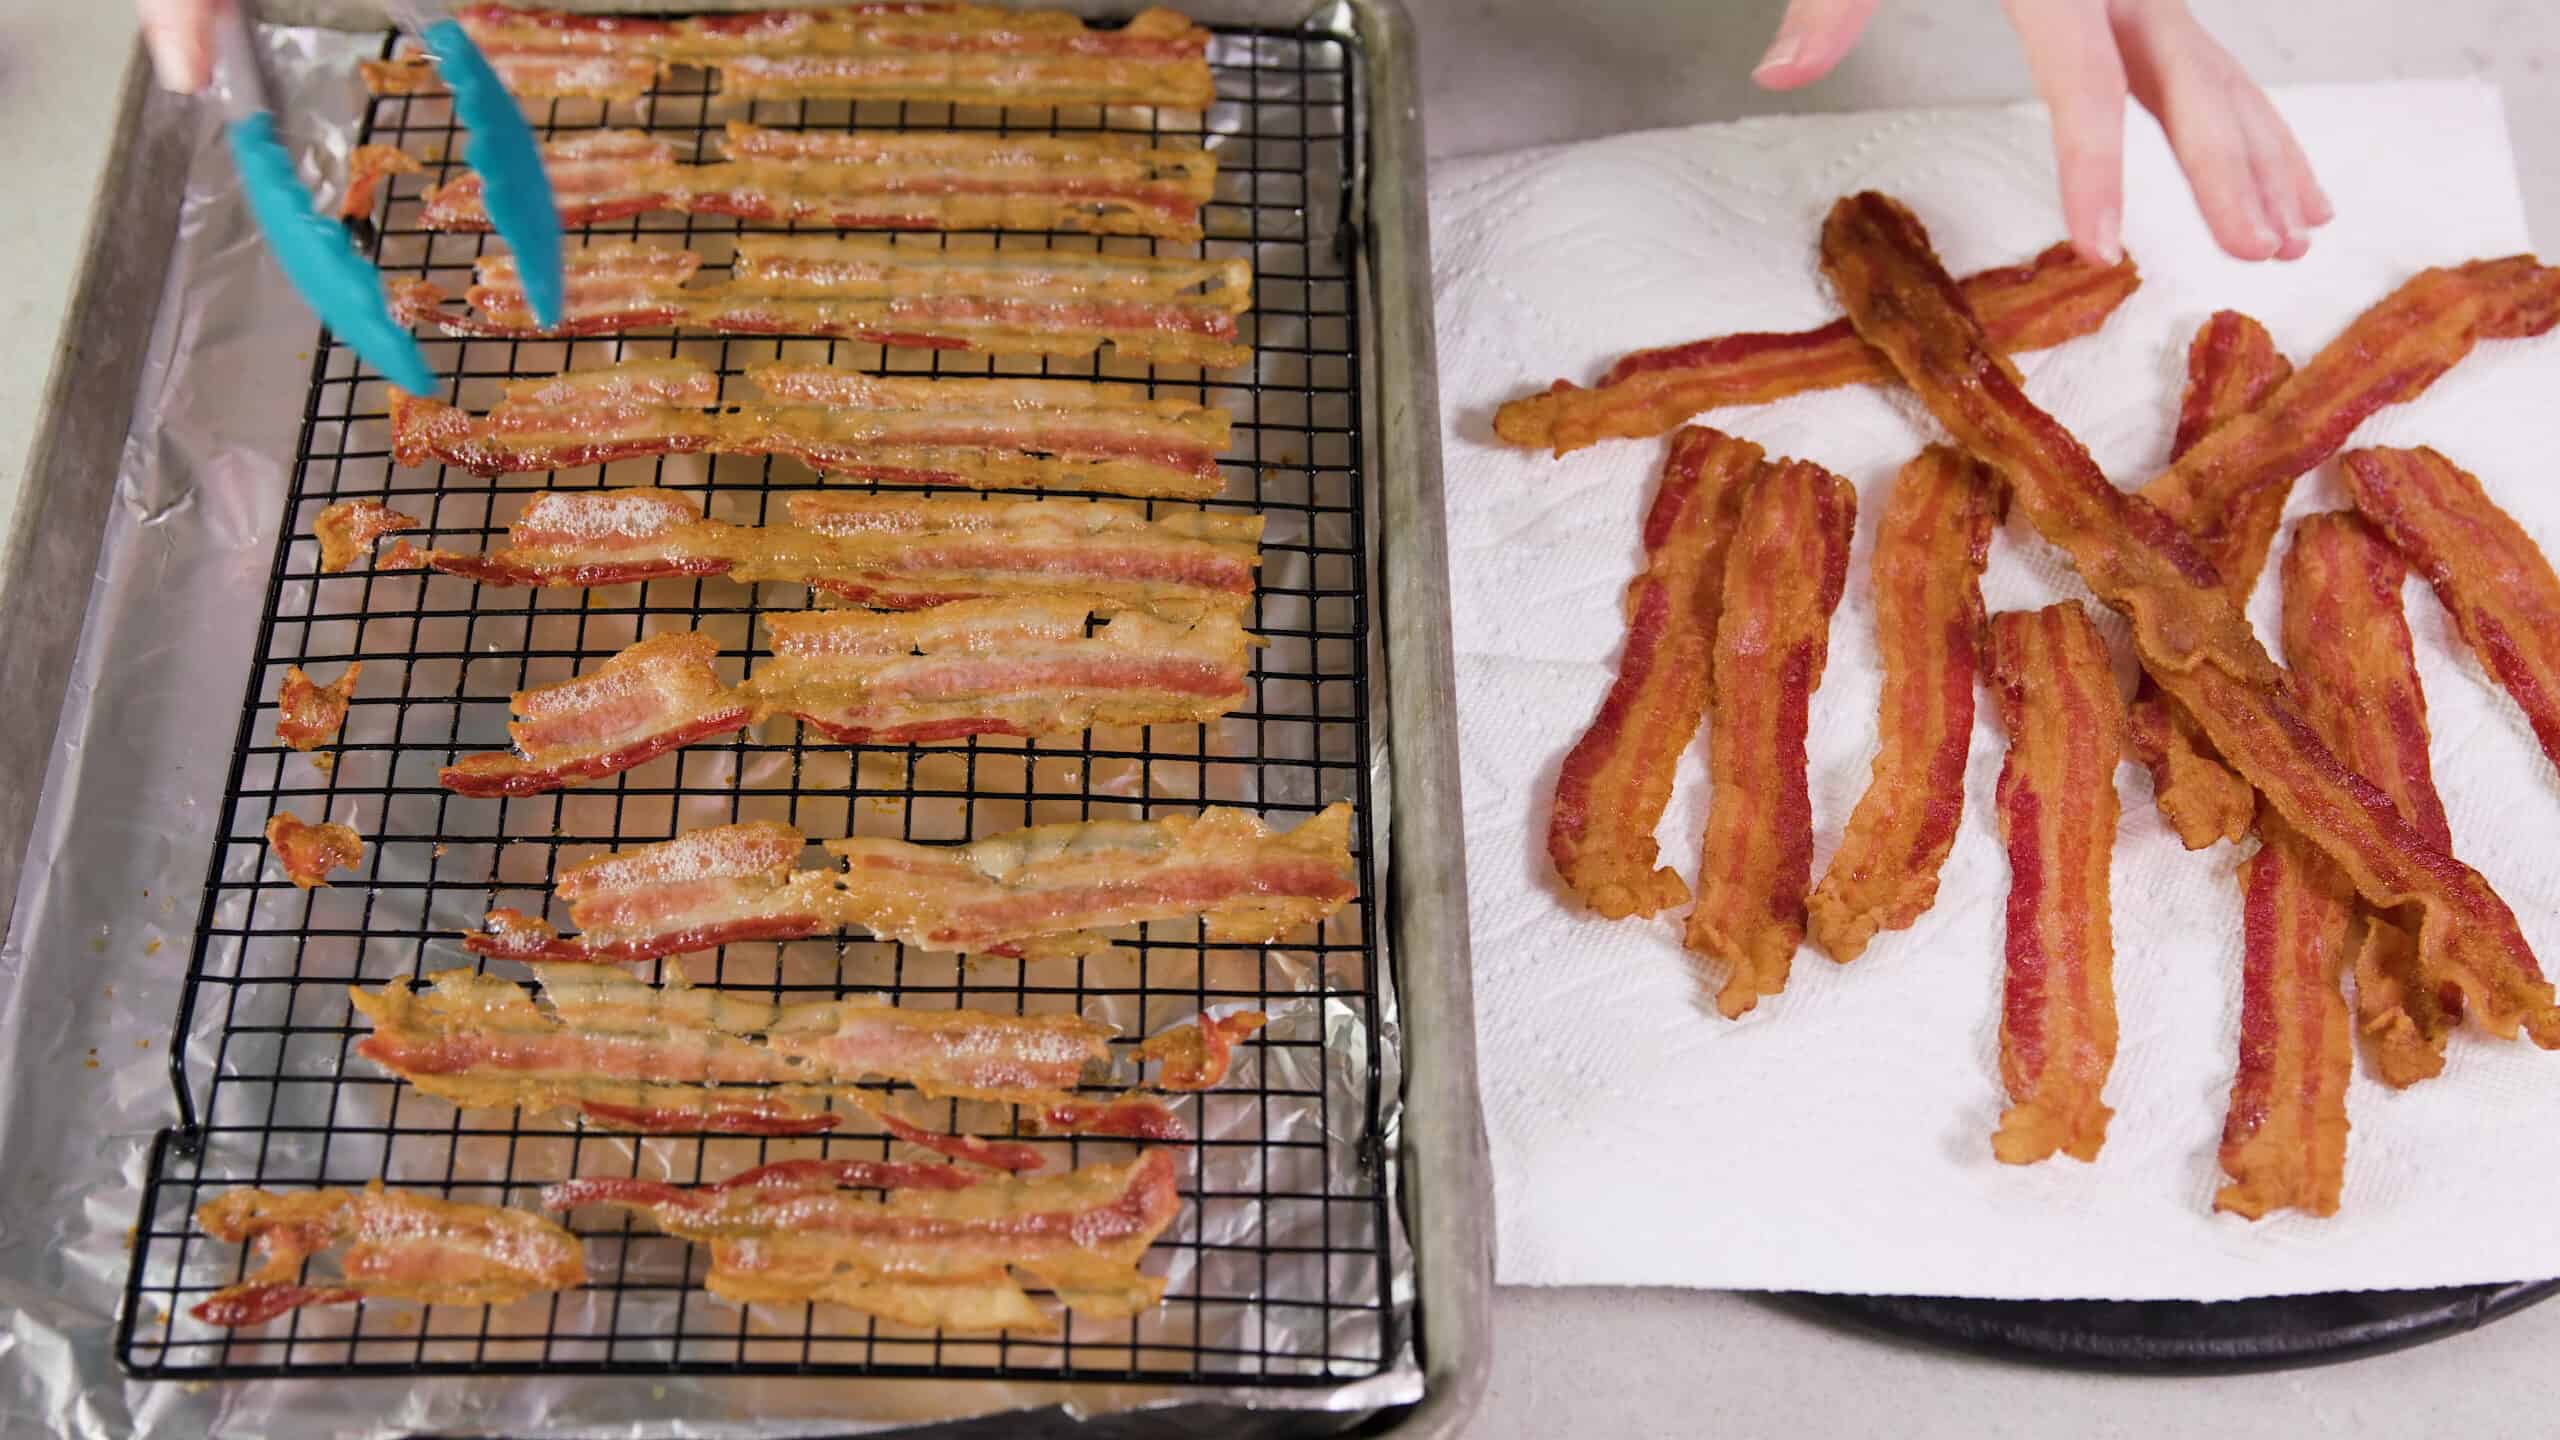 Overhead view of a side by side comparison of cracked broken bacon on a cooling rack inside a metal baking sheet lined with aluminum foil on the left compared to the full strips of golden brown bacon resting on a paper towel covered plate on the right.